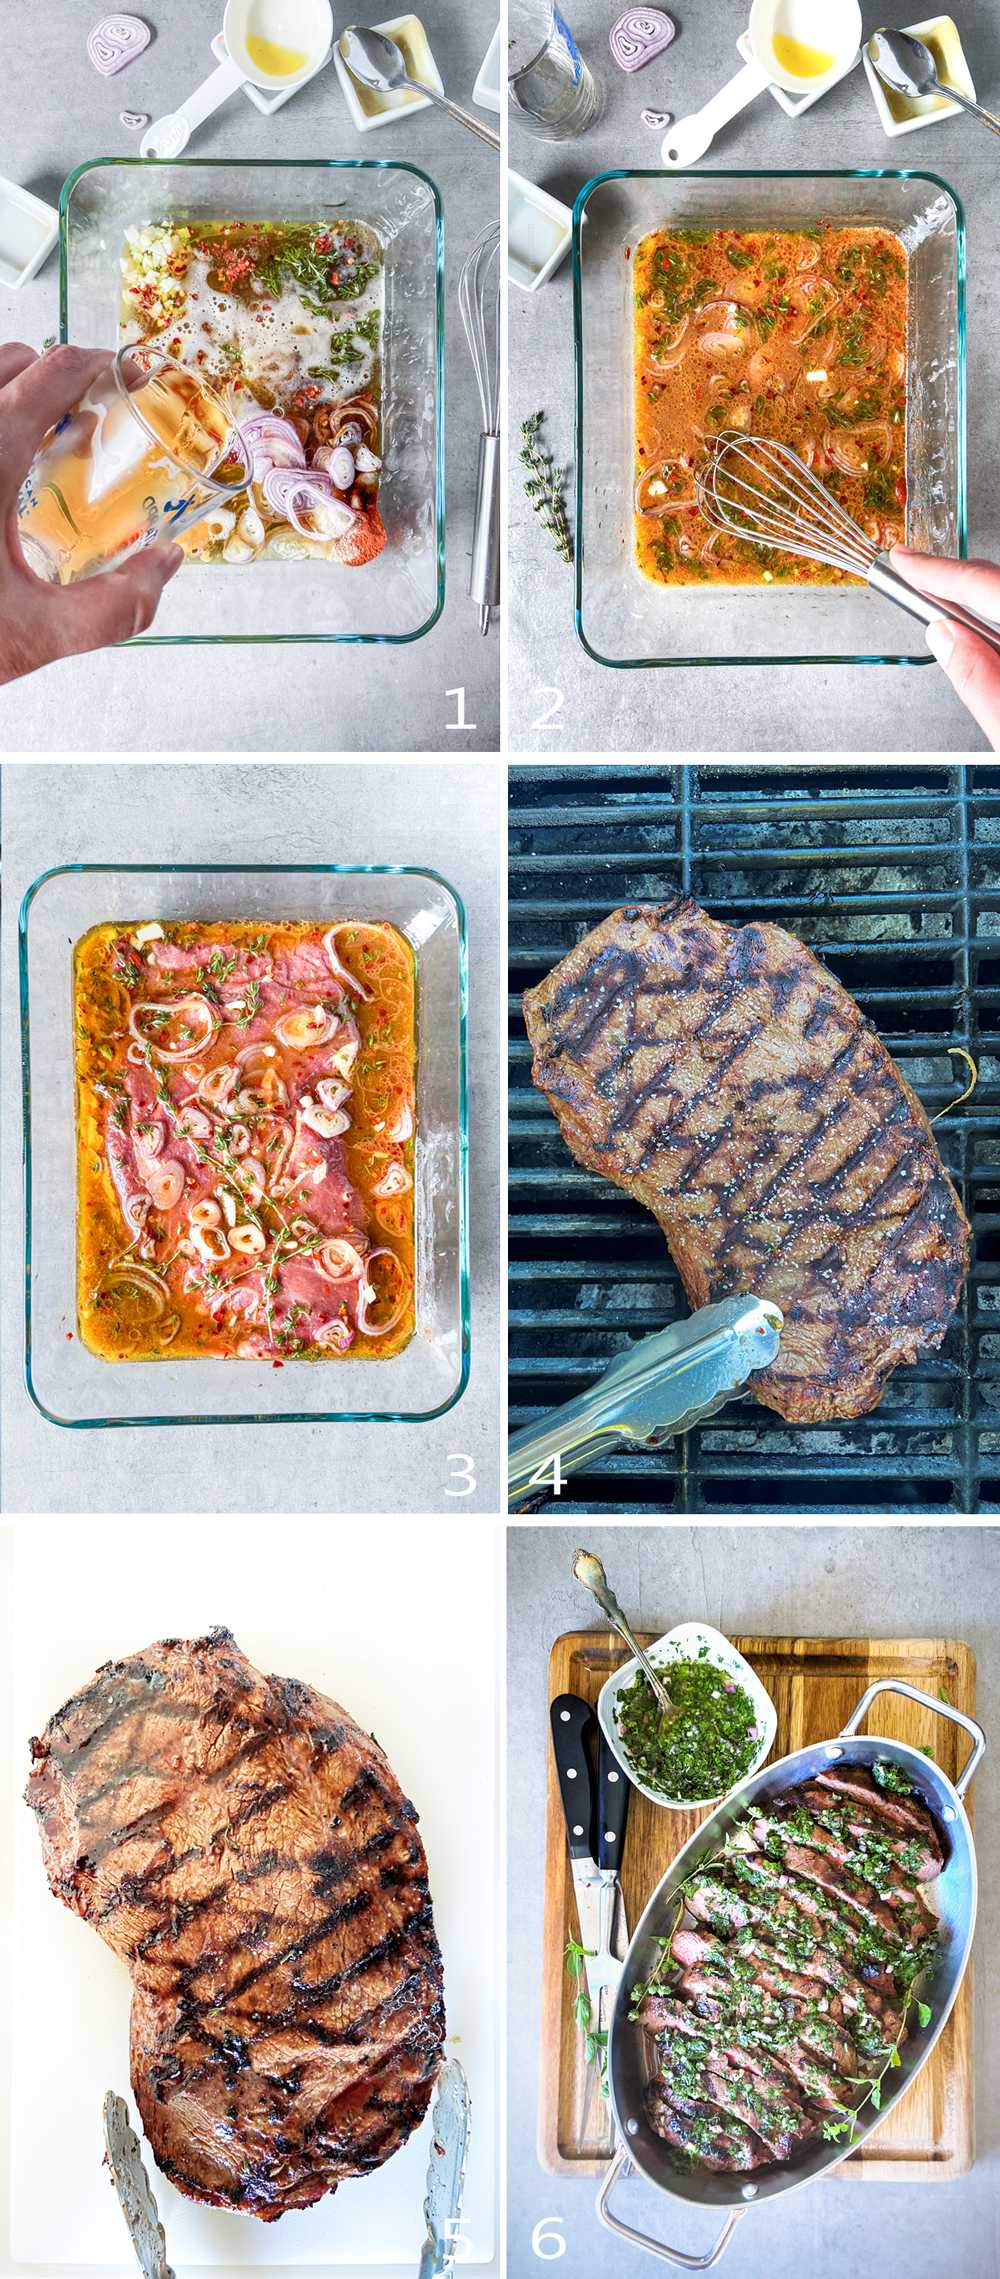 How to make a flavorful beer marinade for grilled steak cuts such as flank, flat iron, sirloin, skirt steak, 